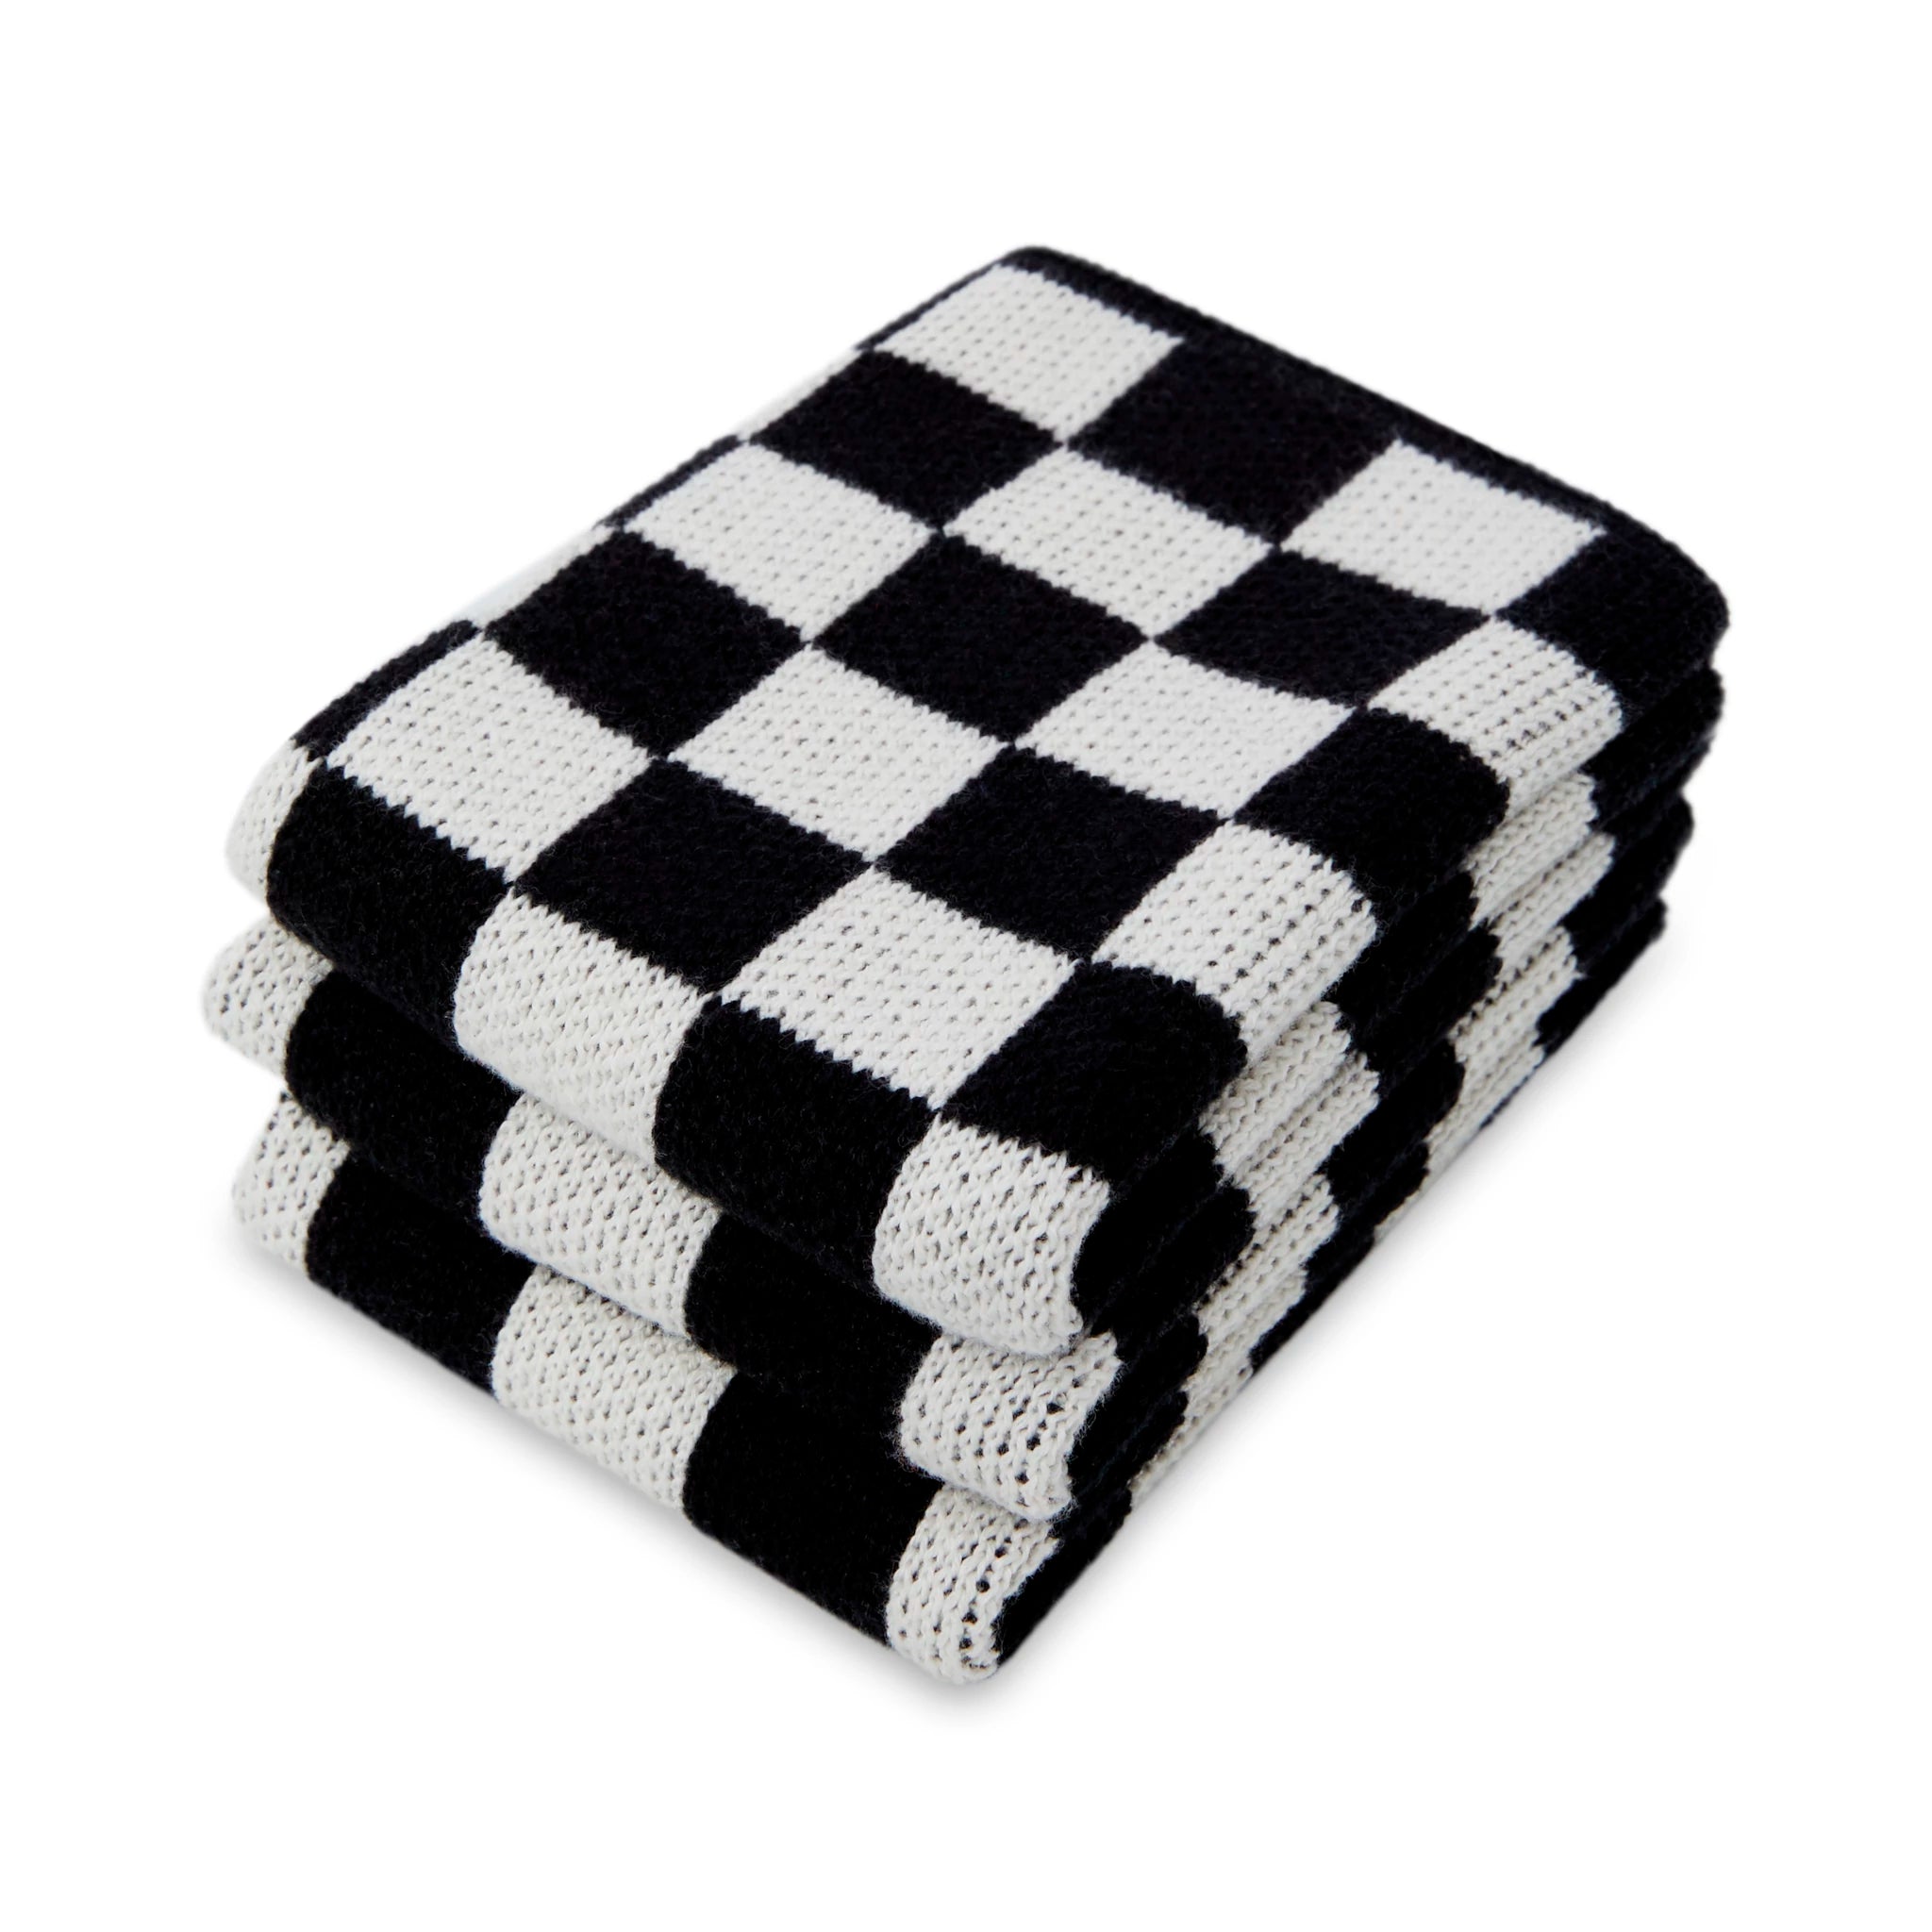 Reusable Dish Cloths | Set of 3 | Black Check | by Sophie Home - Lifestory